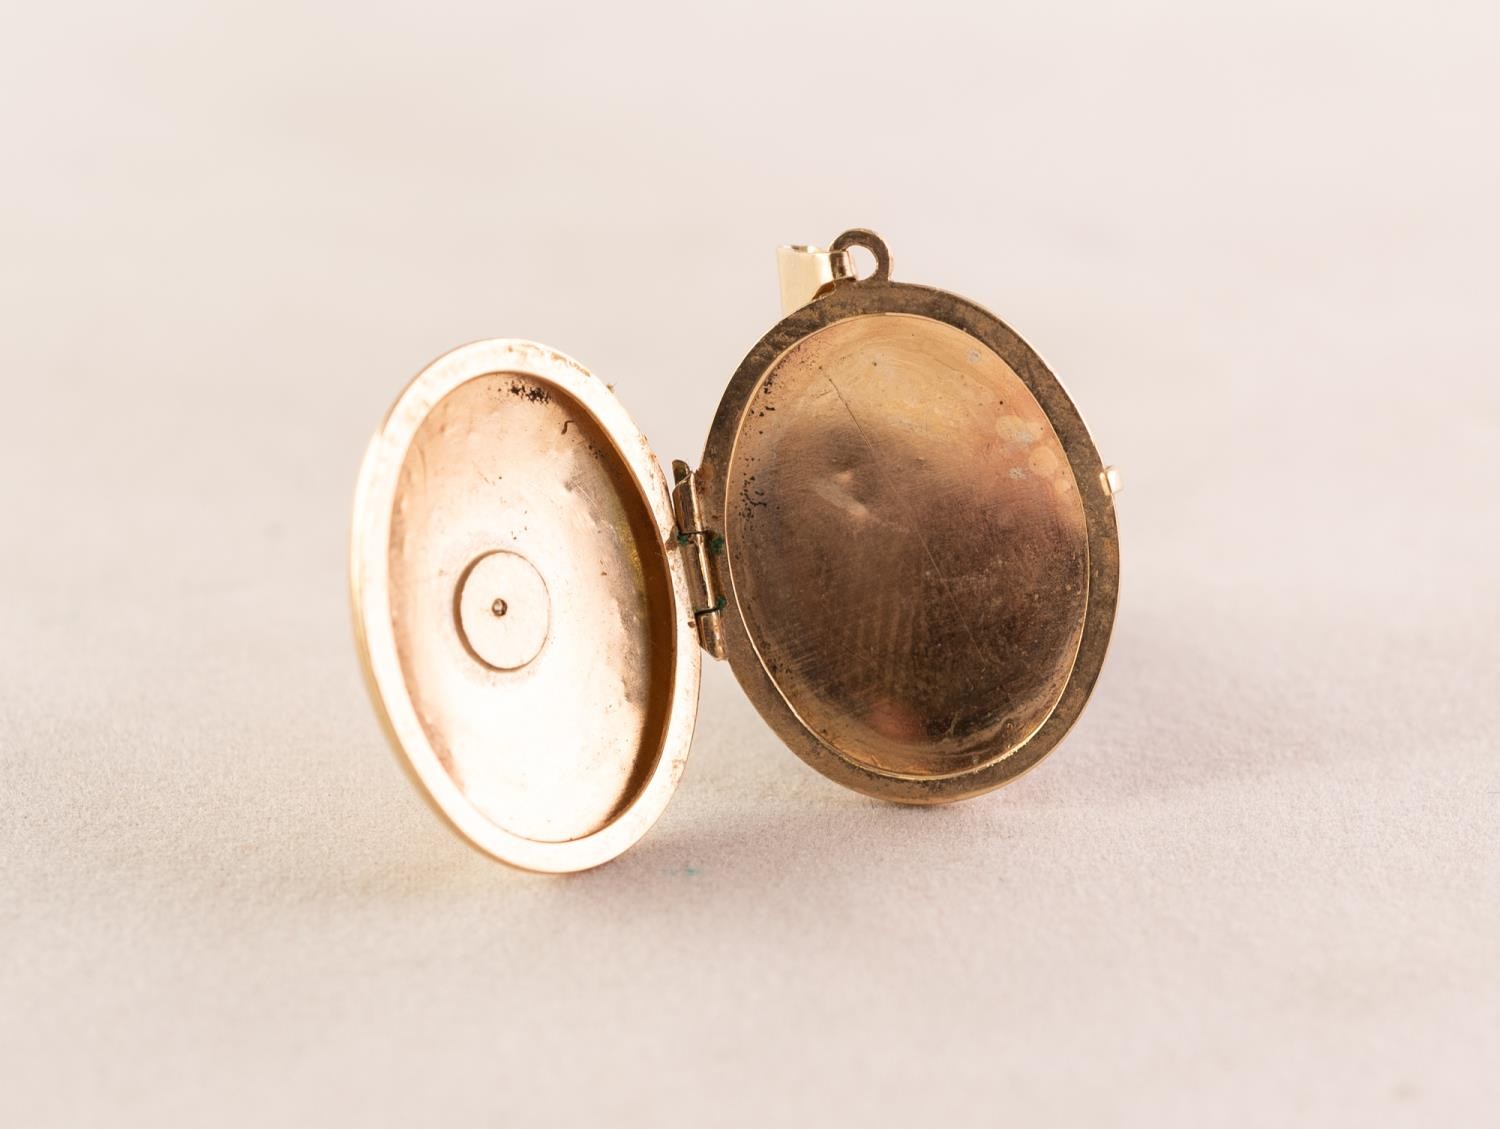 9ct GOLD SMALL ENGRAVED OVAL LOCKET PENDANT, star set with a tiny white stone, 1.9gms - Image 2 of 2